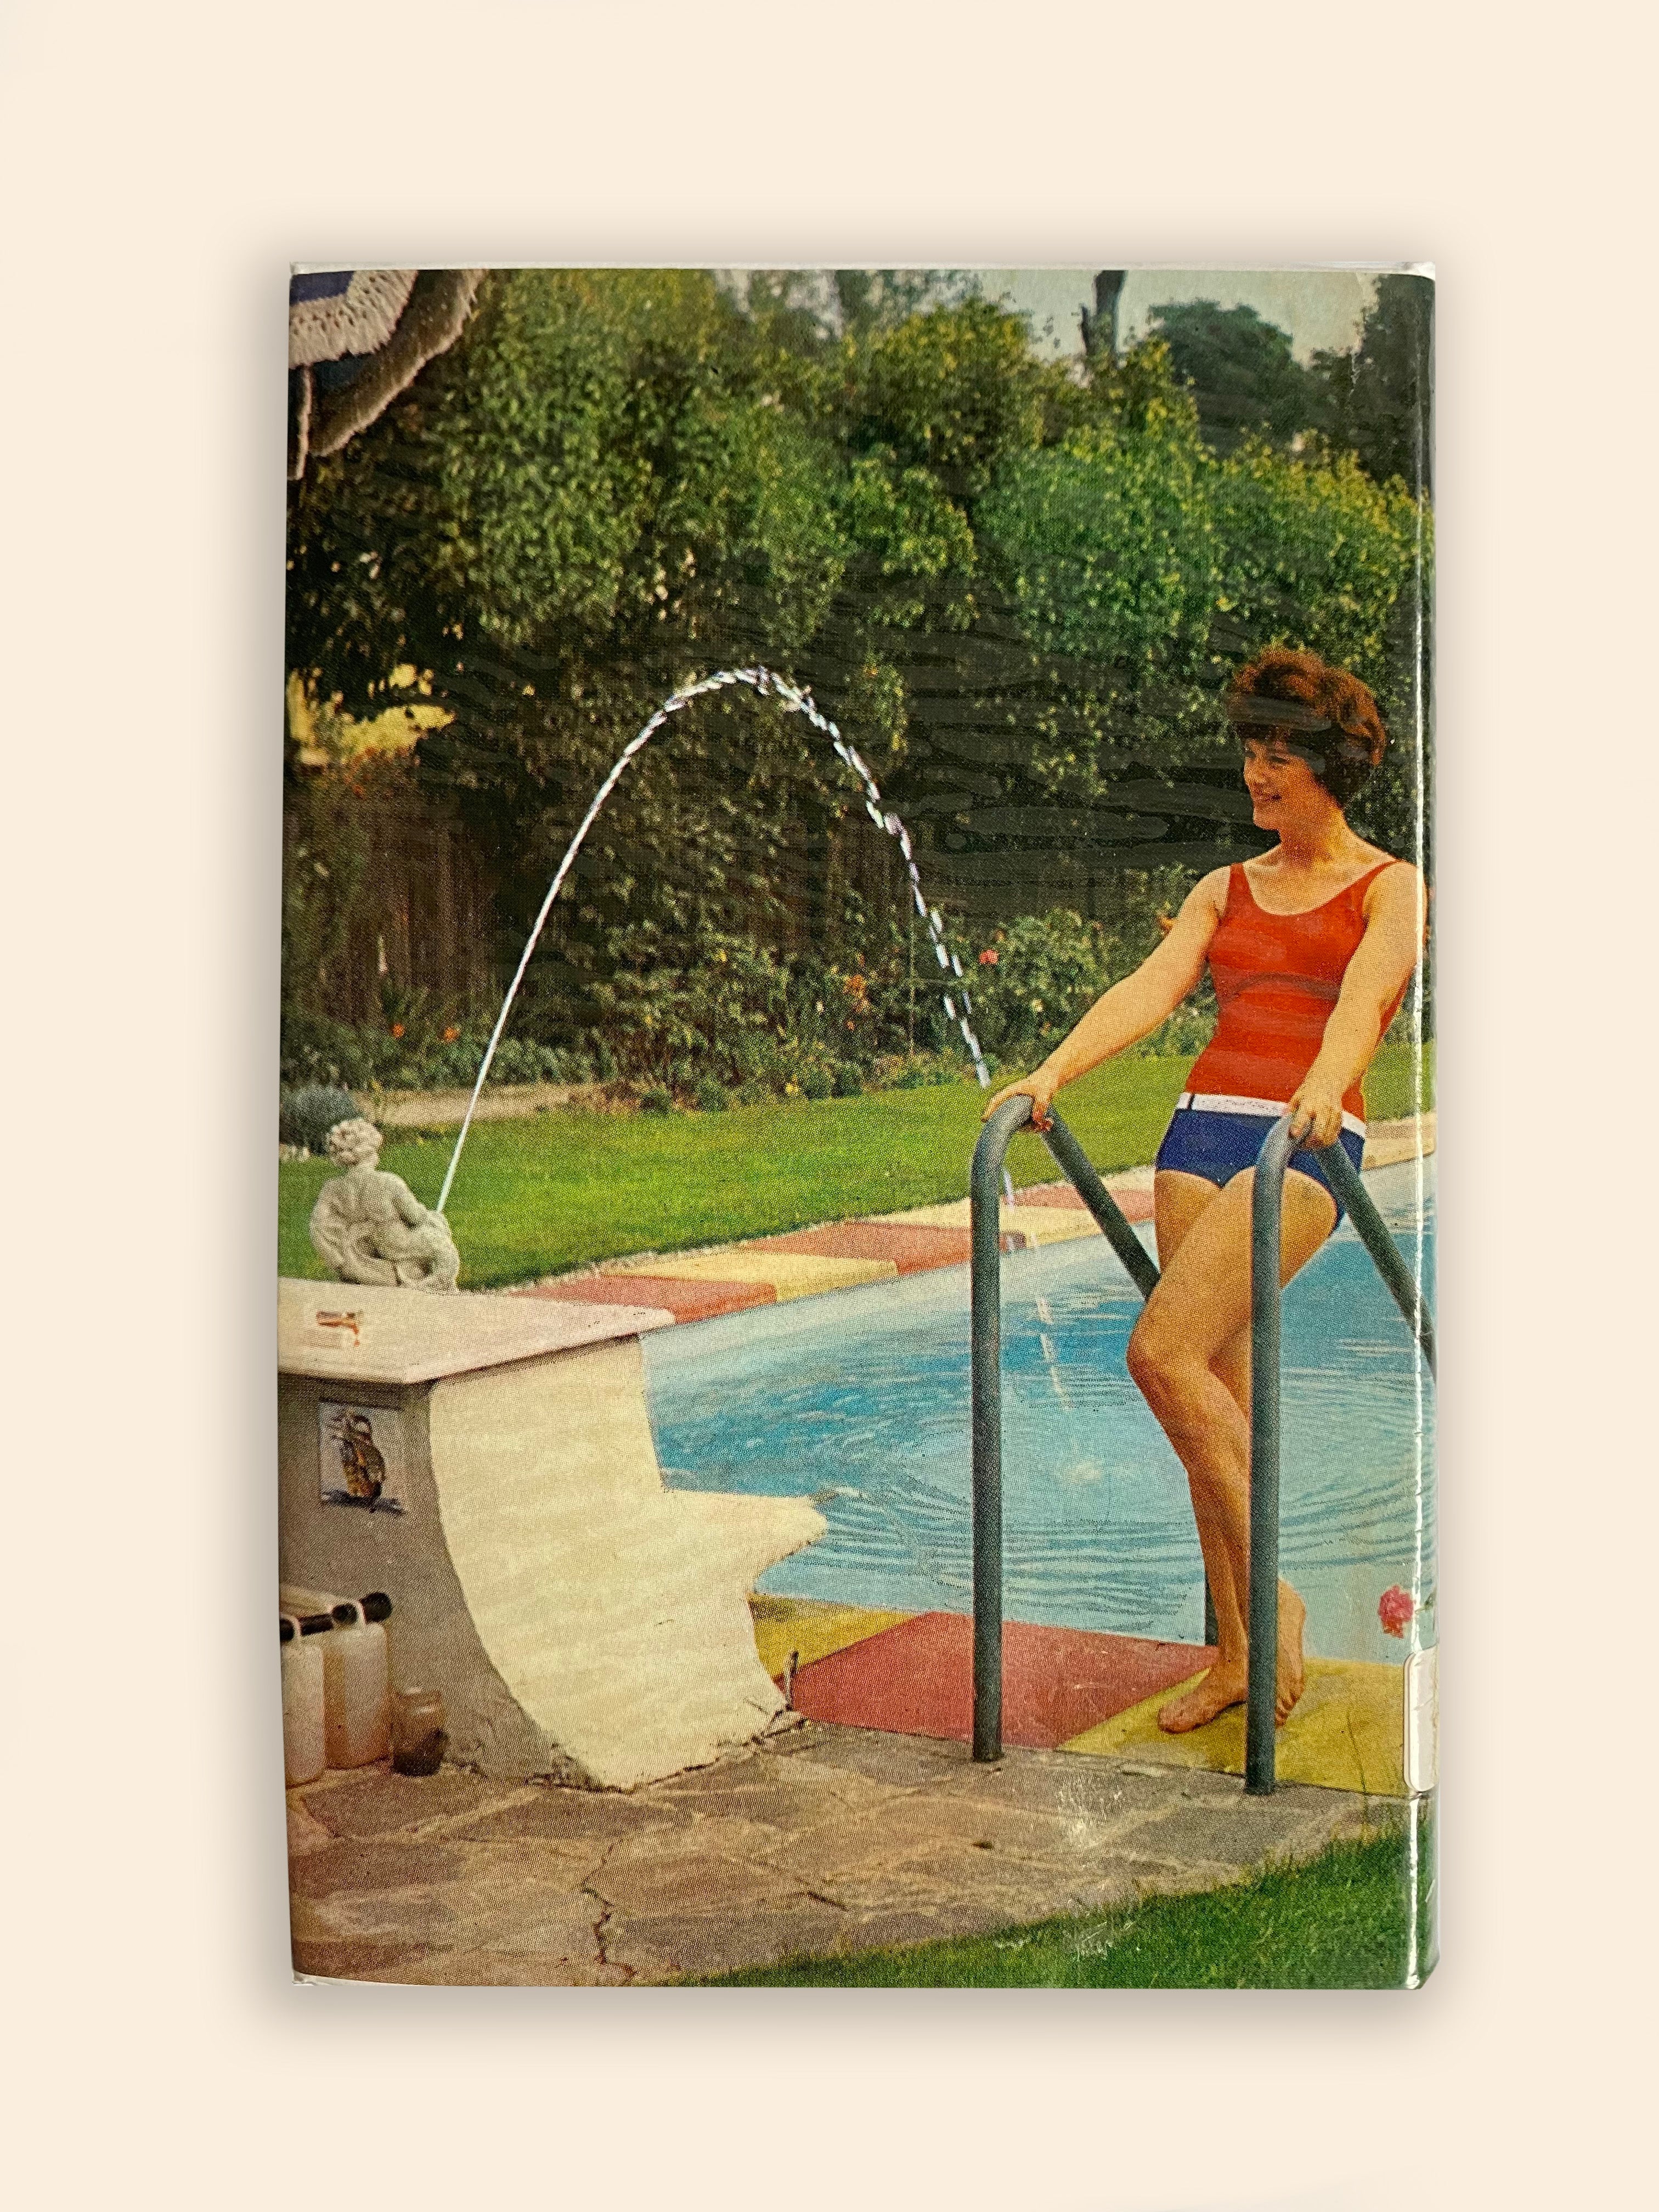 Build your own Swimming Pool | 1969